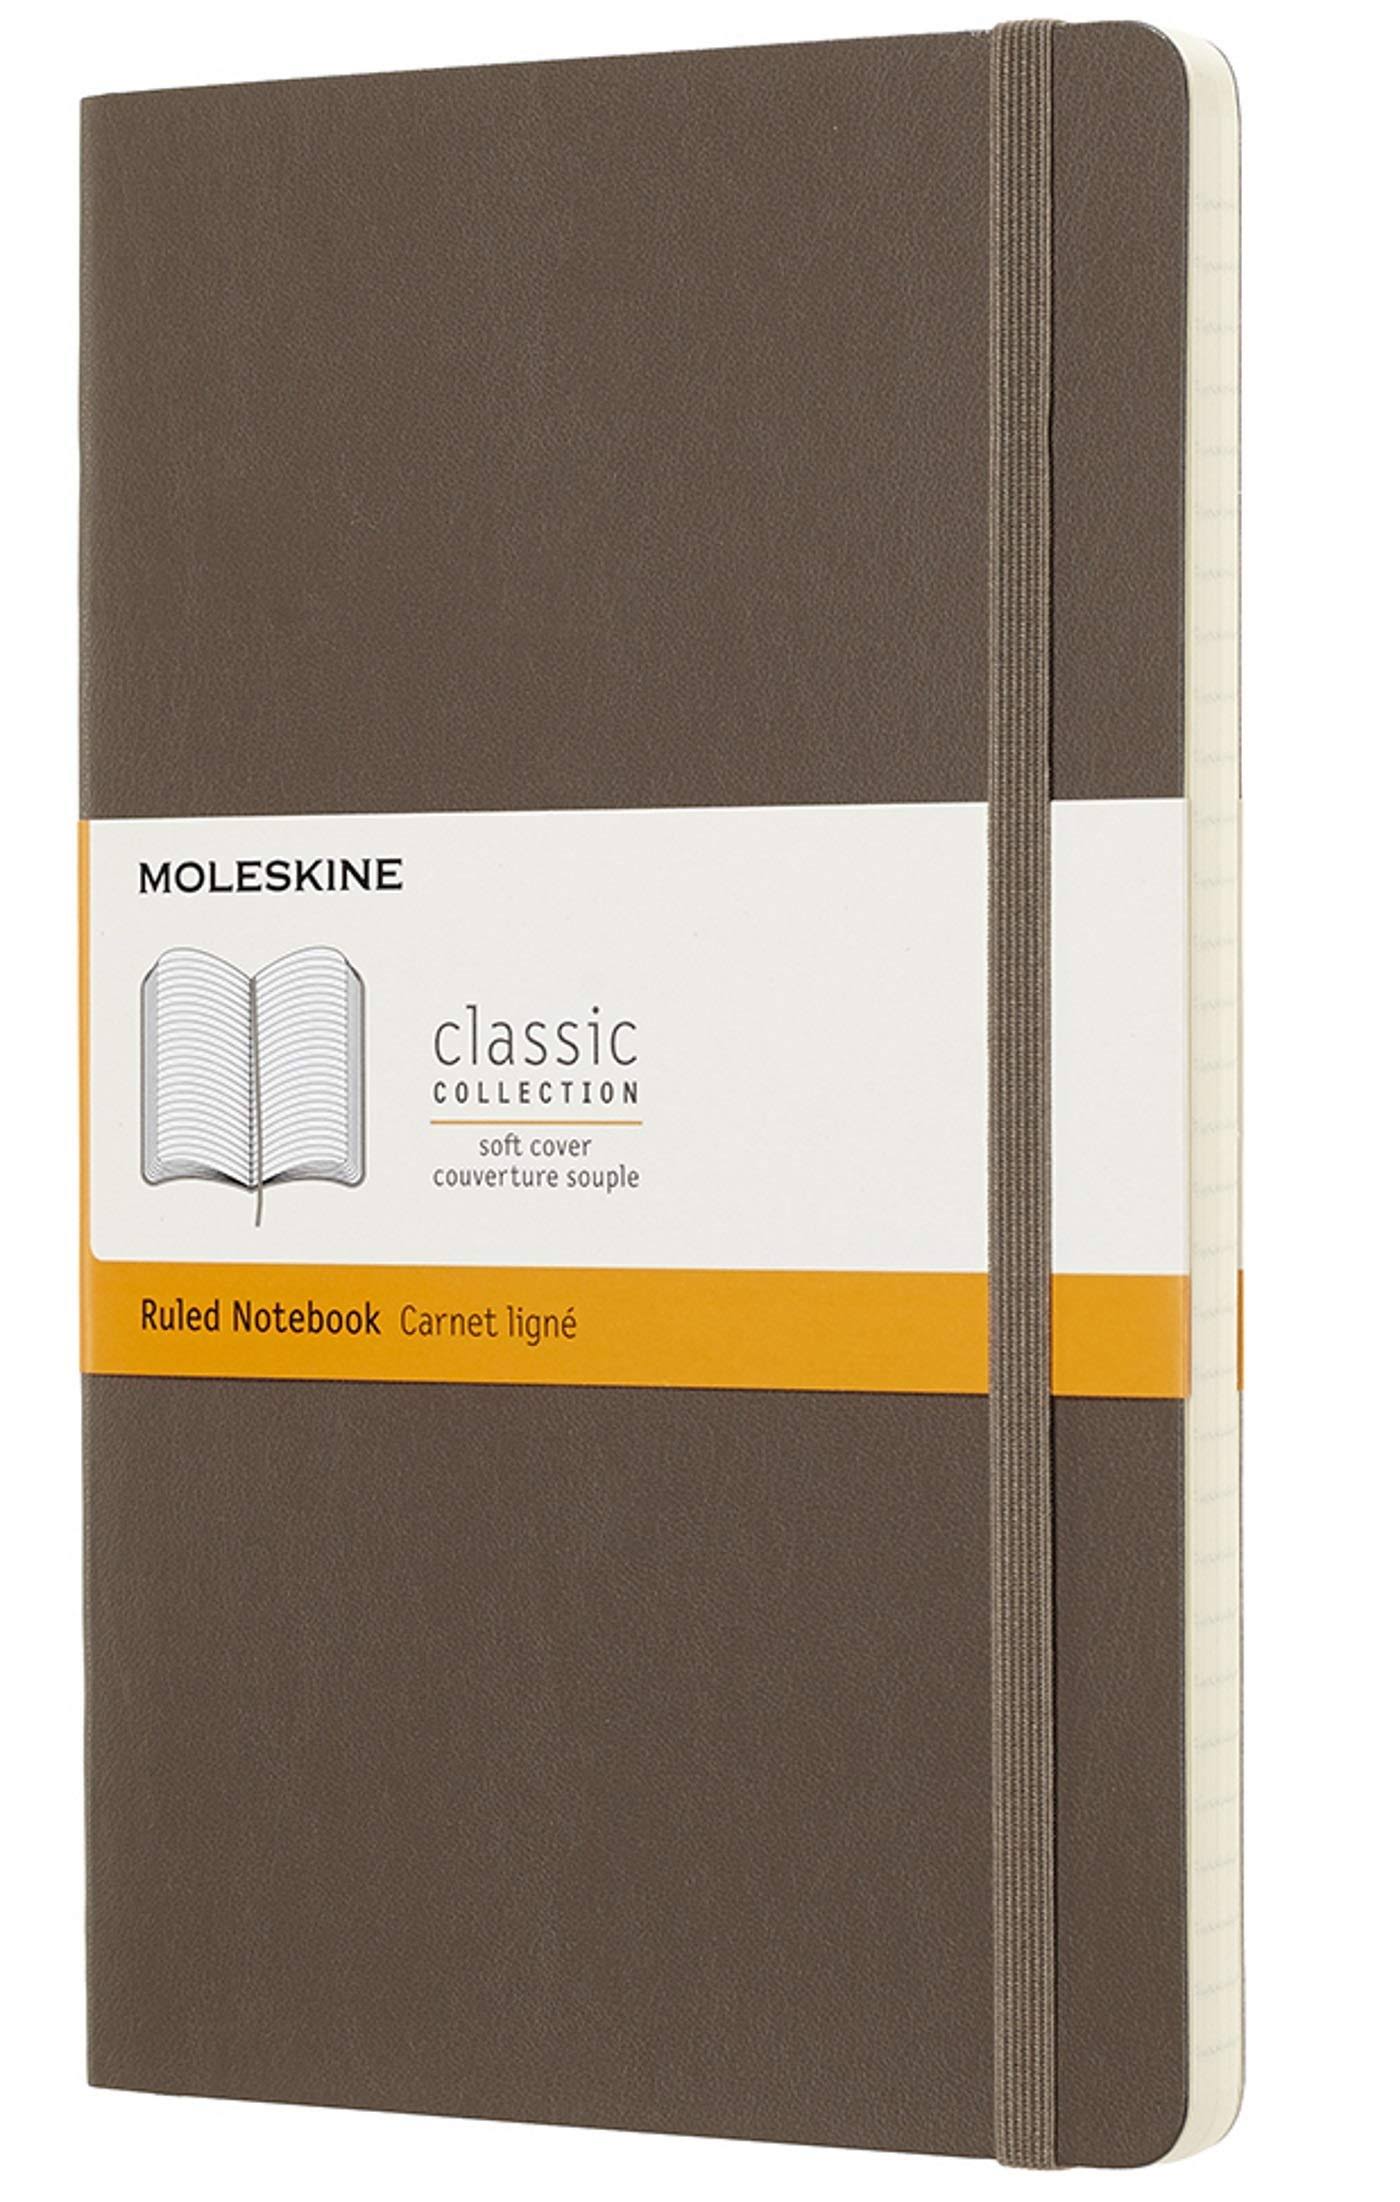 Moleskine - Classic Soft Cover Notebook - Ruled - Large - Earth Brown